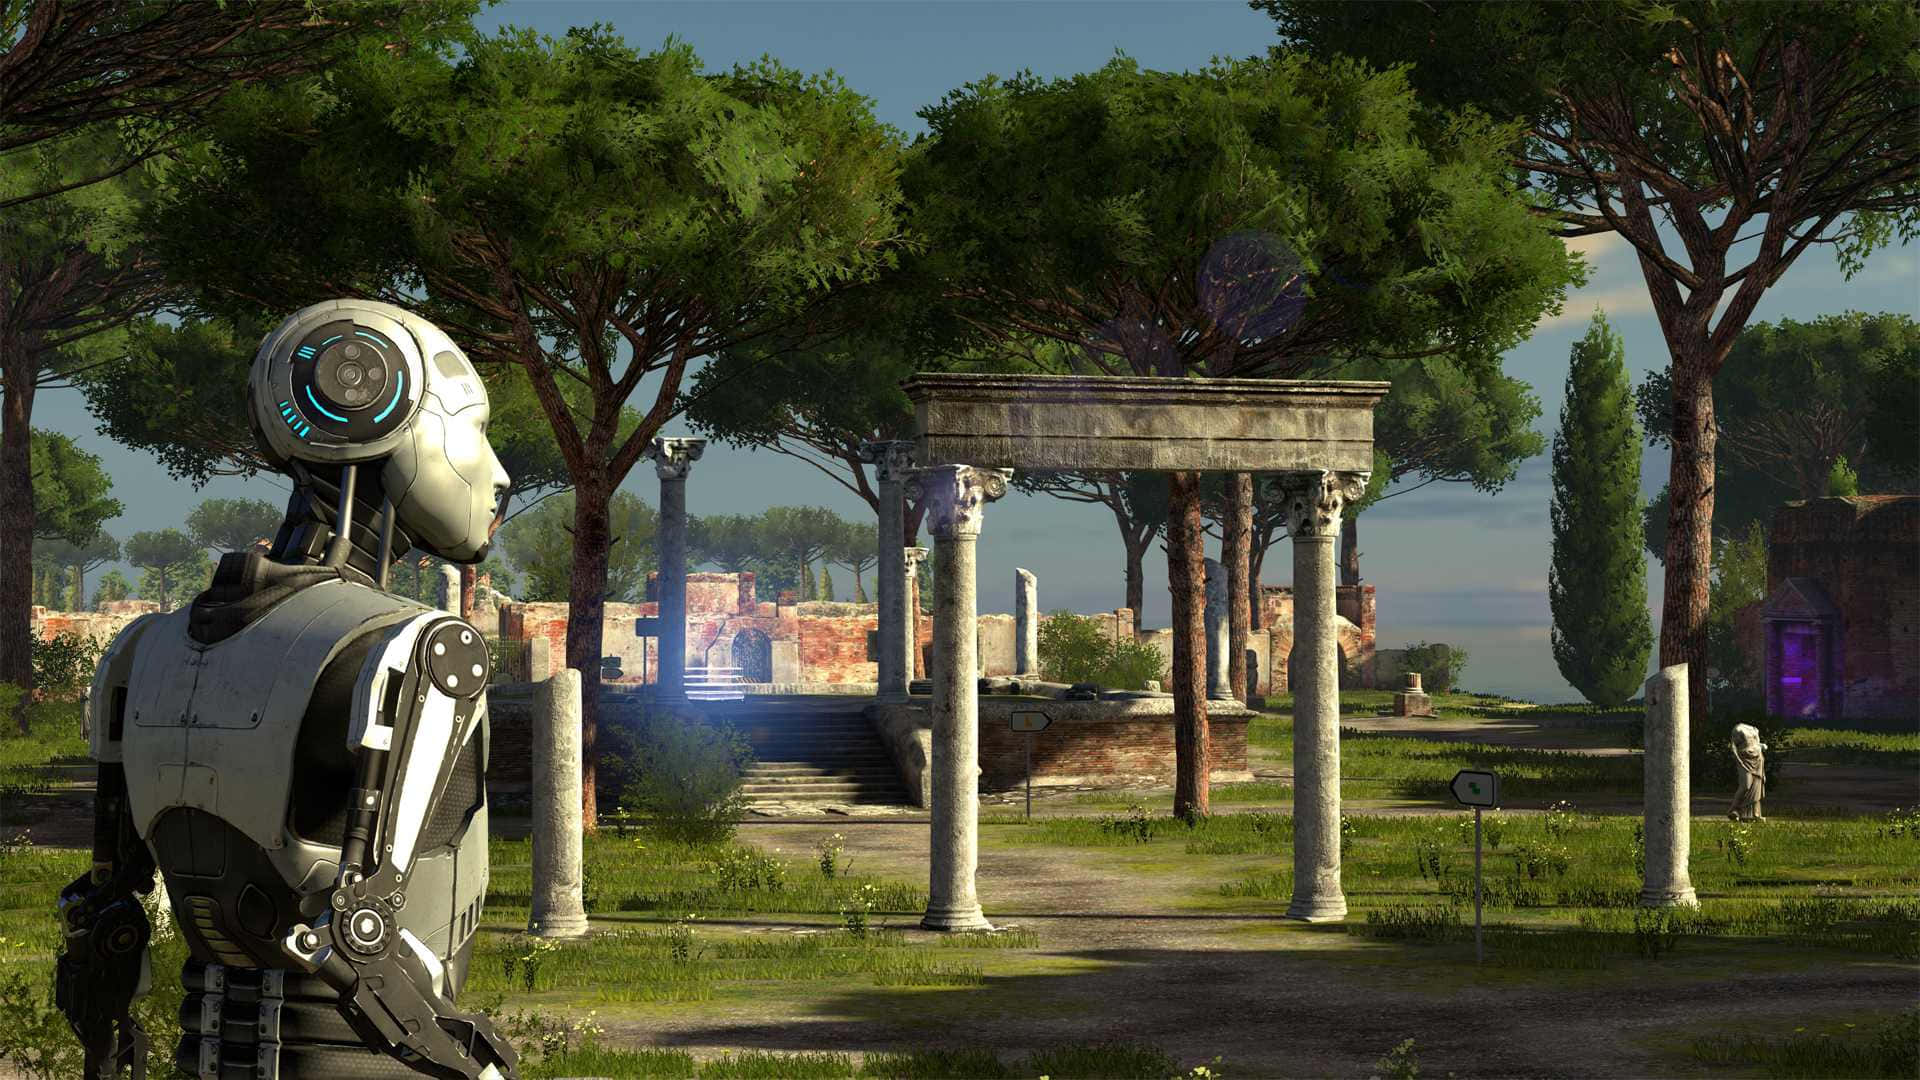 Hd The Talos Principle Background In The Park